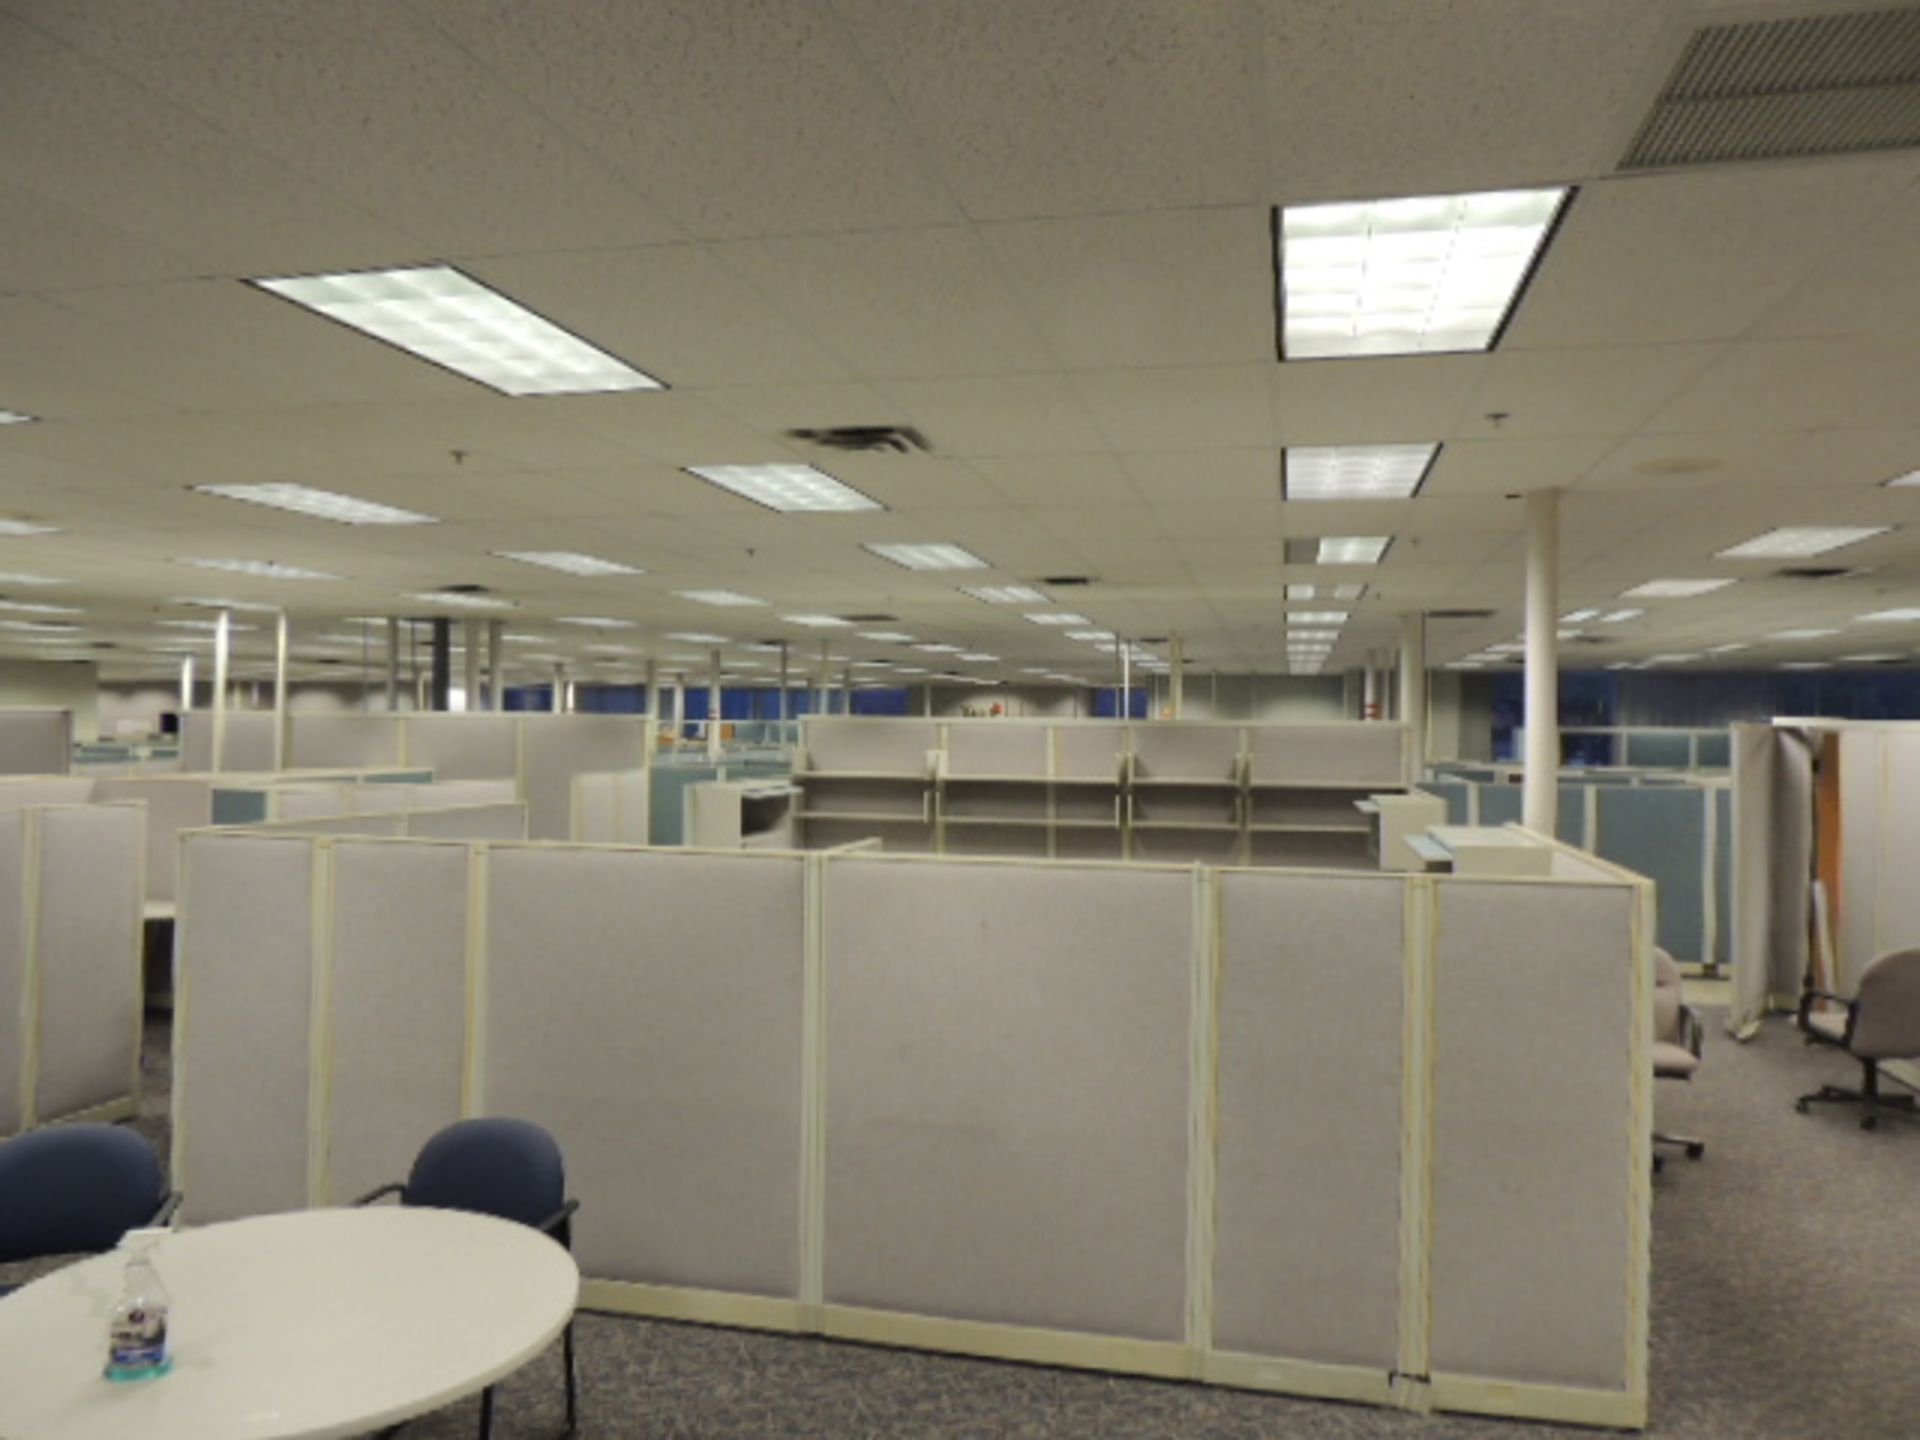 Office Cubicles & Contents. Lot: (8) offices w/ wooden and metal desks, file cabinets and lateral - Image 14 of 47